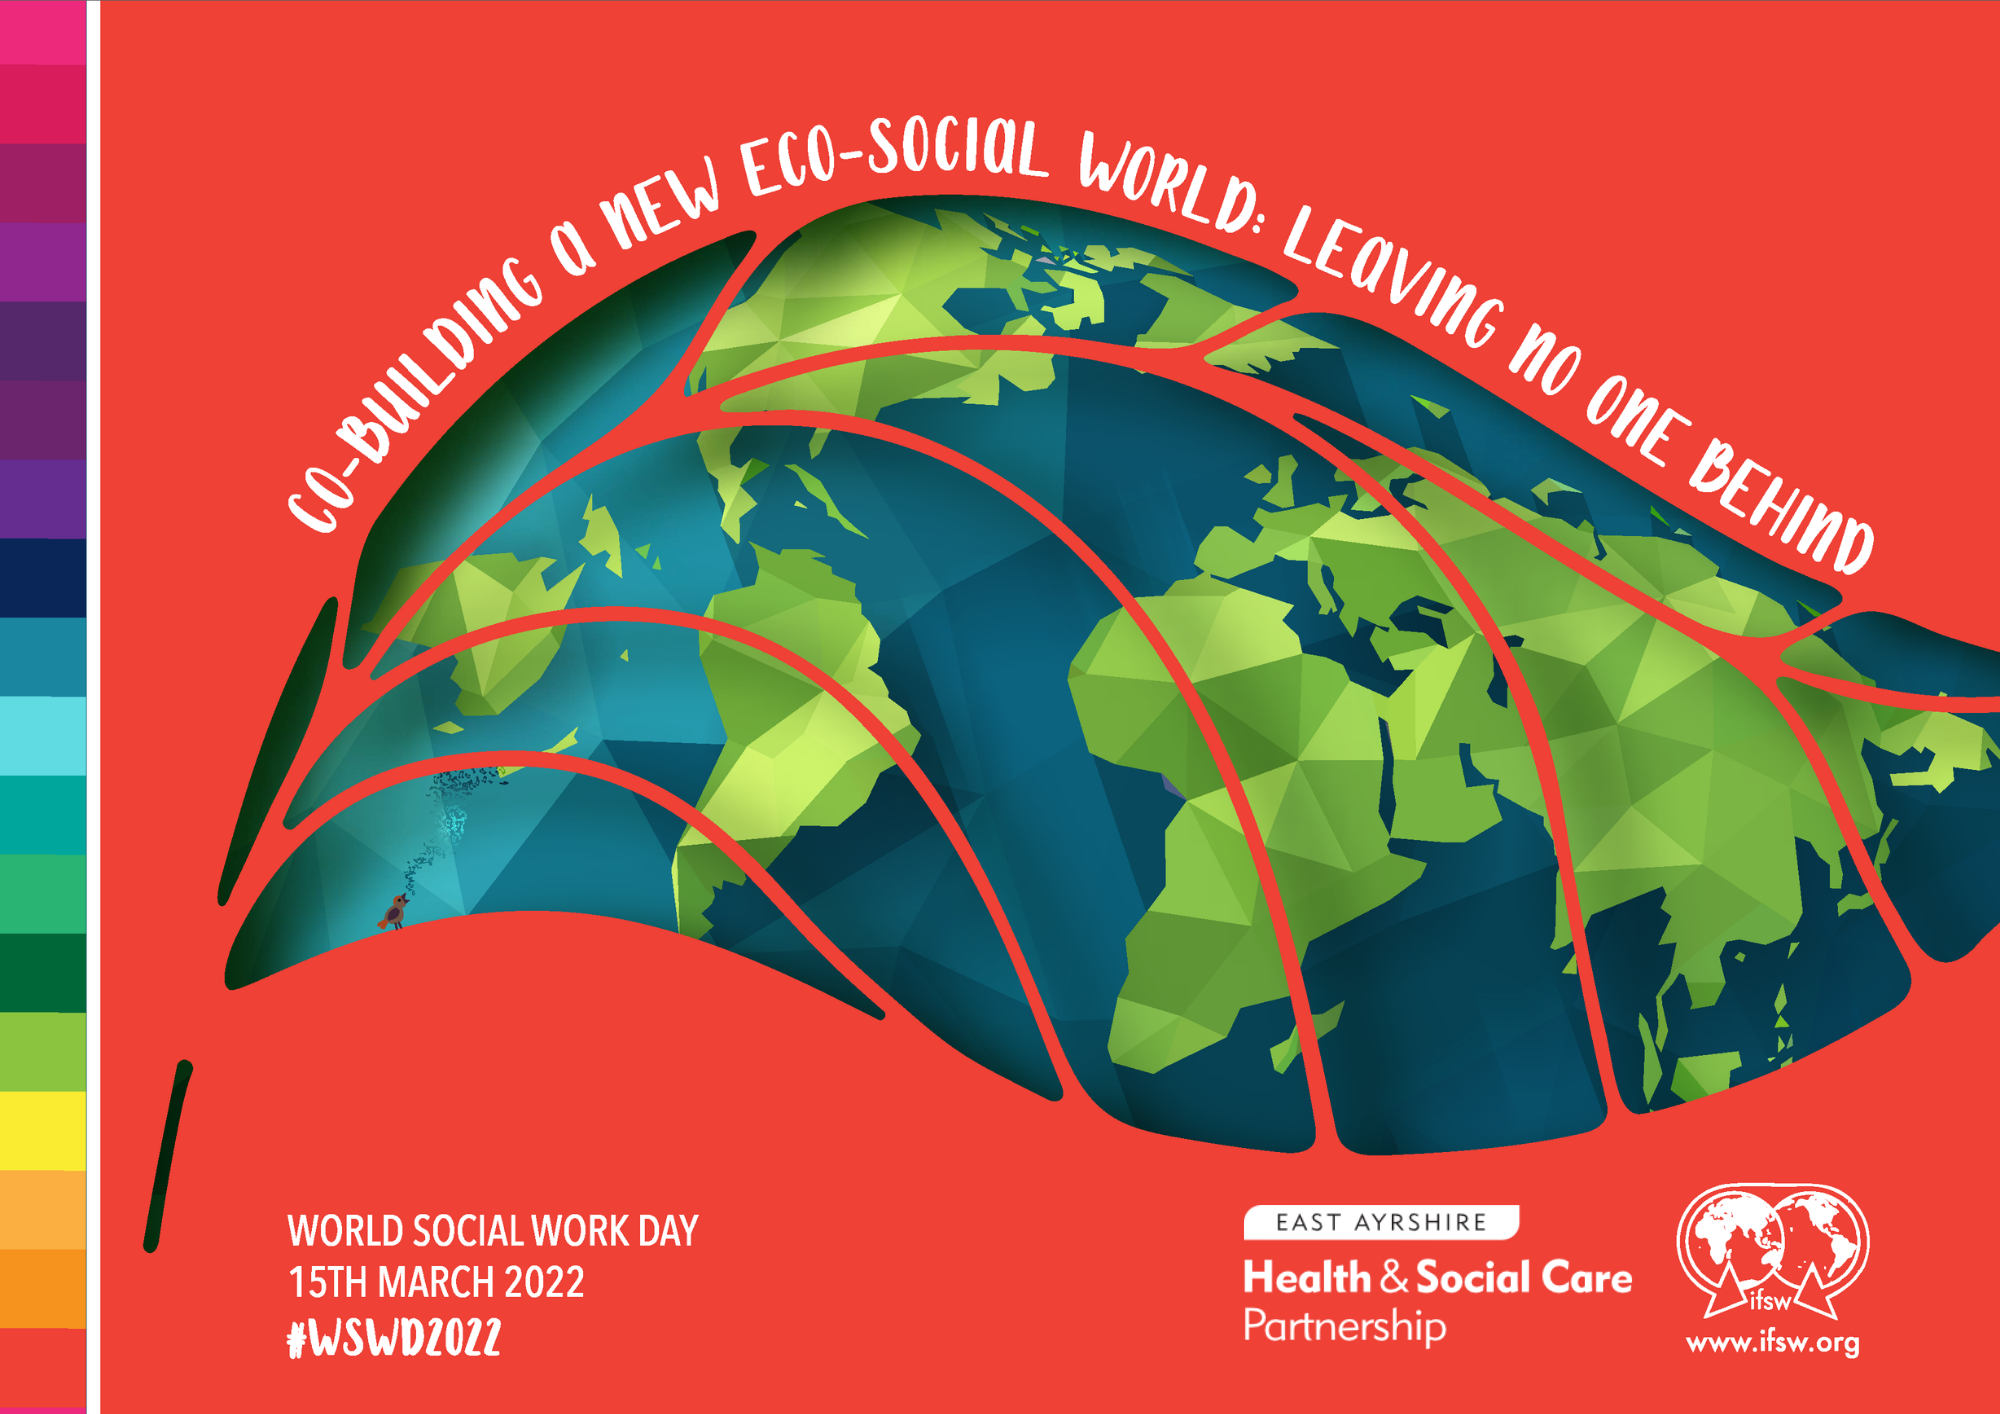 World Social Work Day 2022 poster: ´Co-building a New Eco-Social World: Leaving No One Behind´